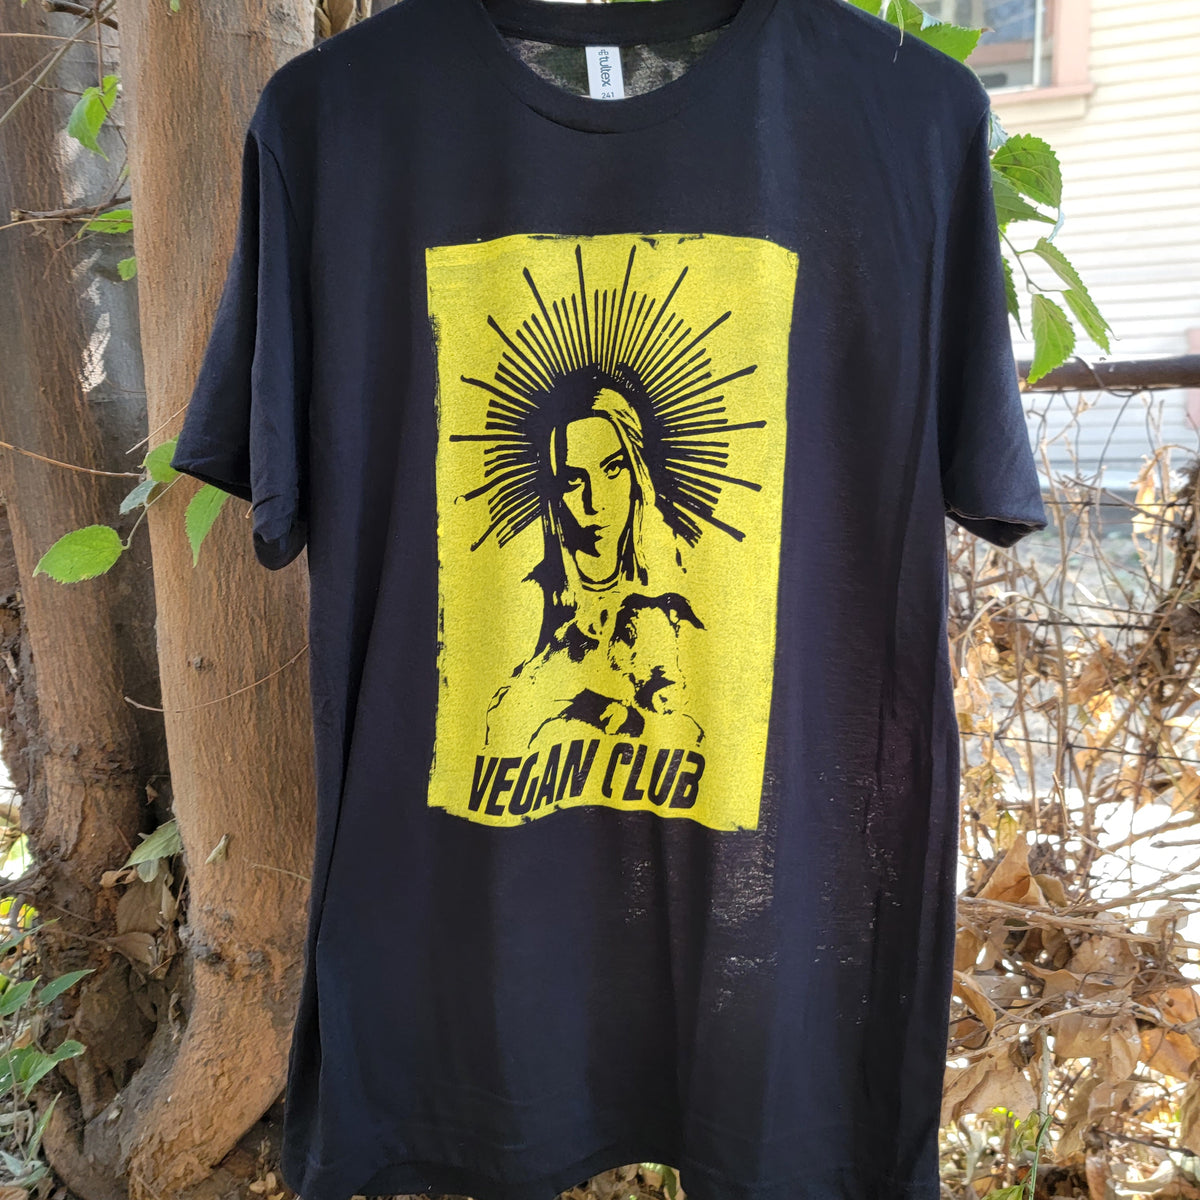 Billie Eilish Halo Vegan Club holding Pig T-shirt with large front design in yellow gold color